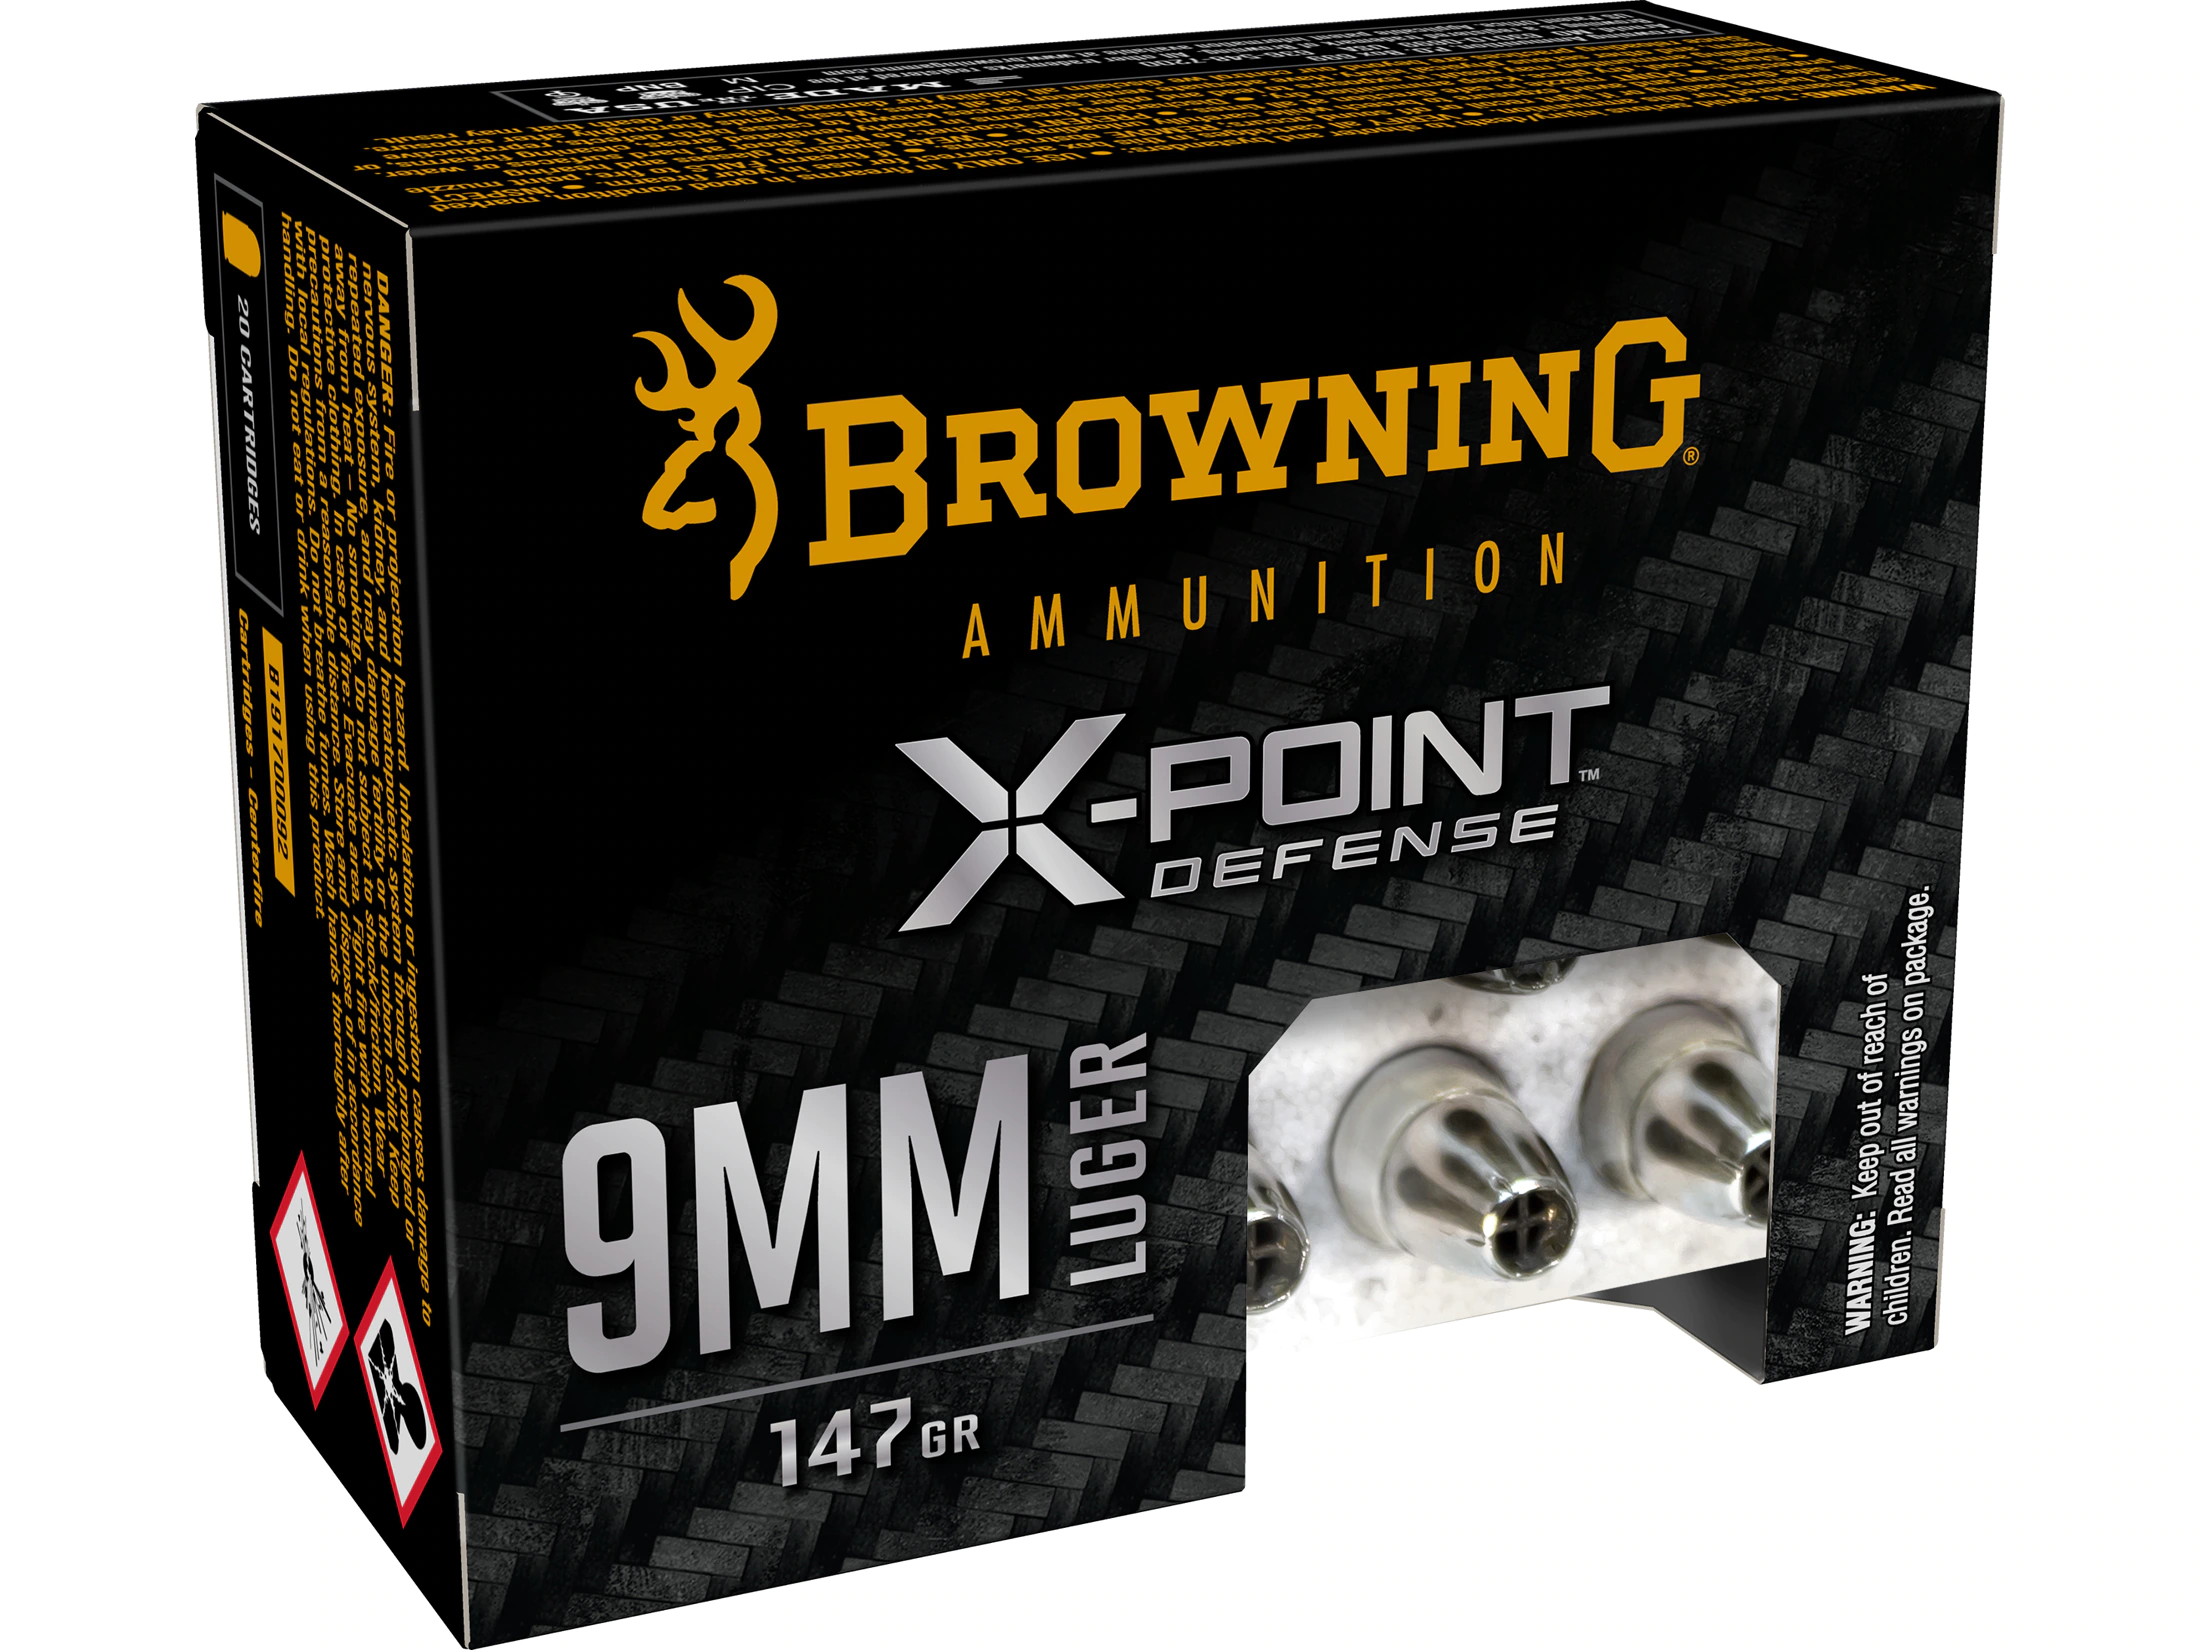 Browning X-Point Defense 9mm 147 Grain JHP 20 Rnd - $19.49 + Free S/H over $49 w/ code "OFFER55555"